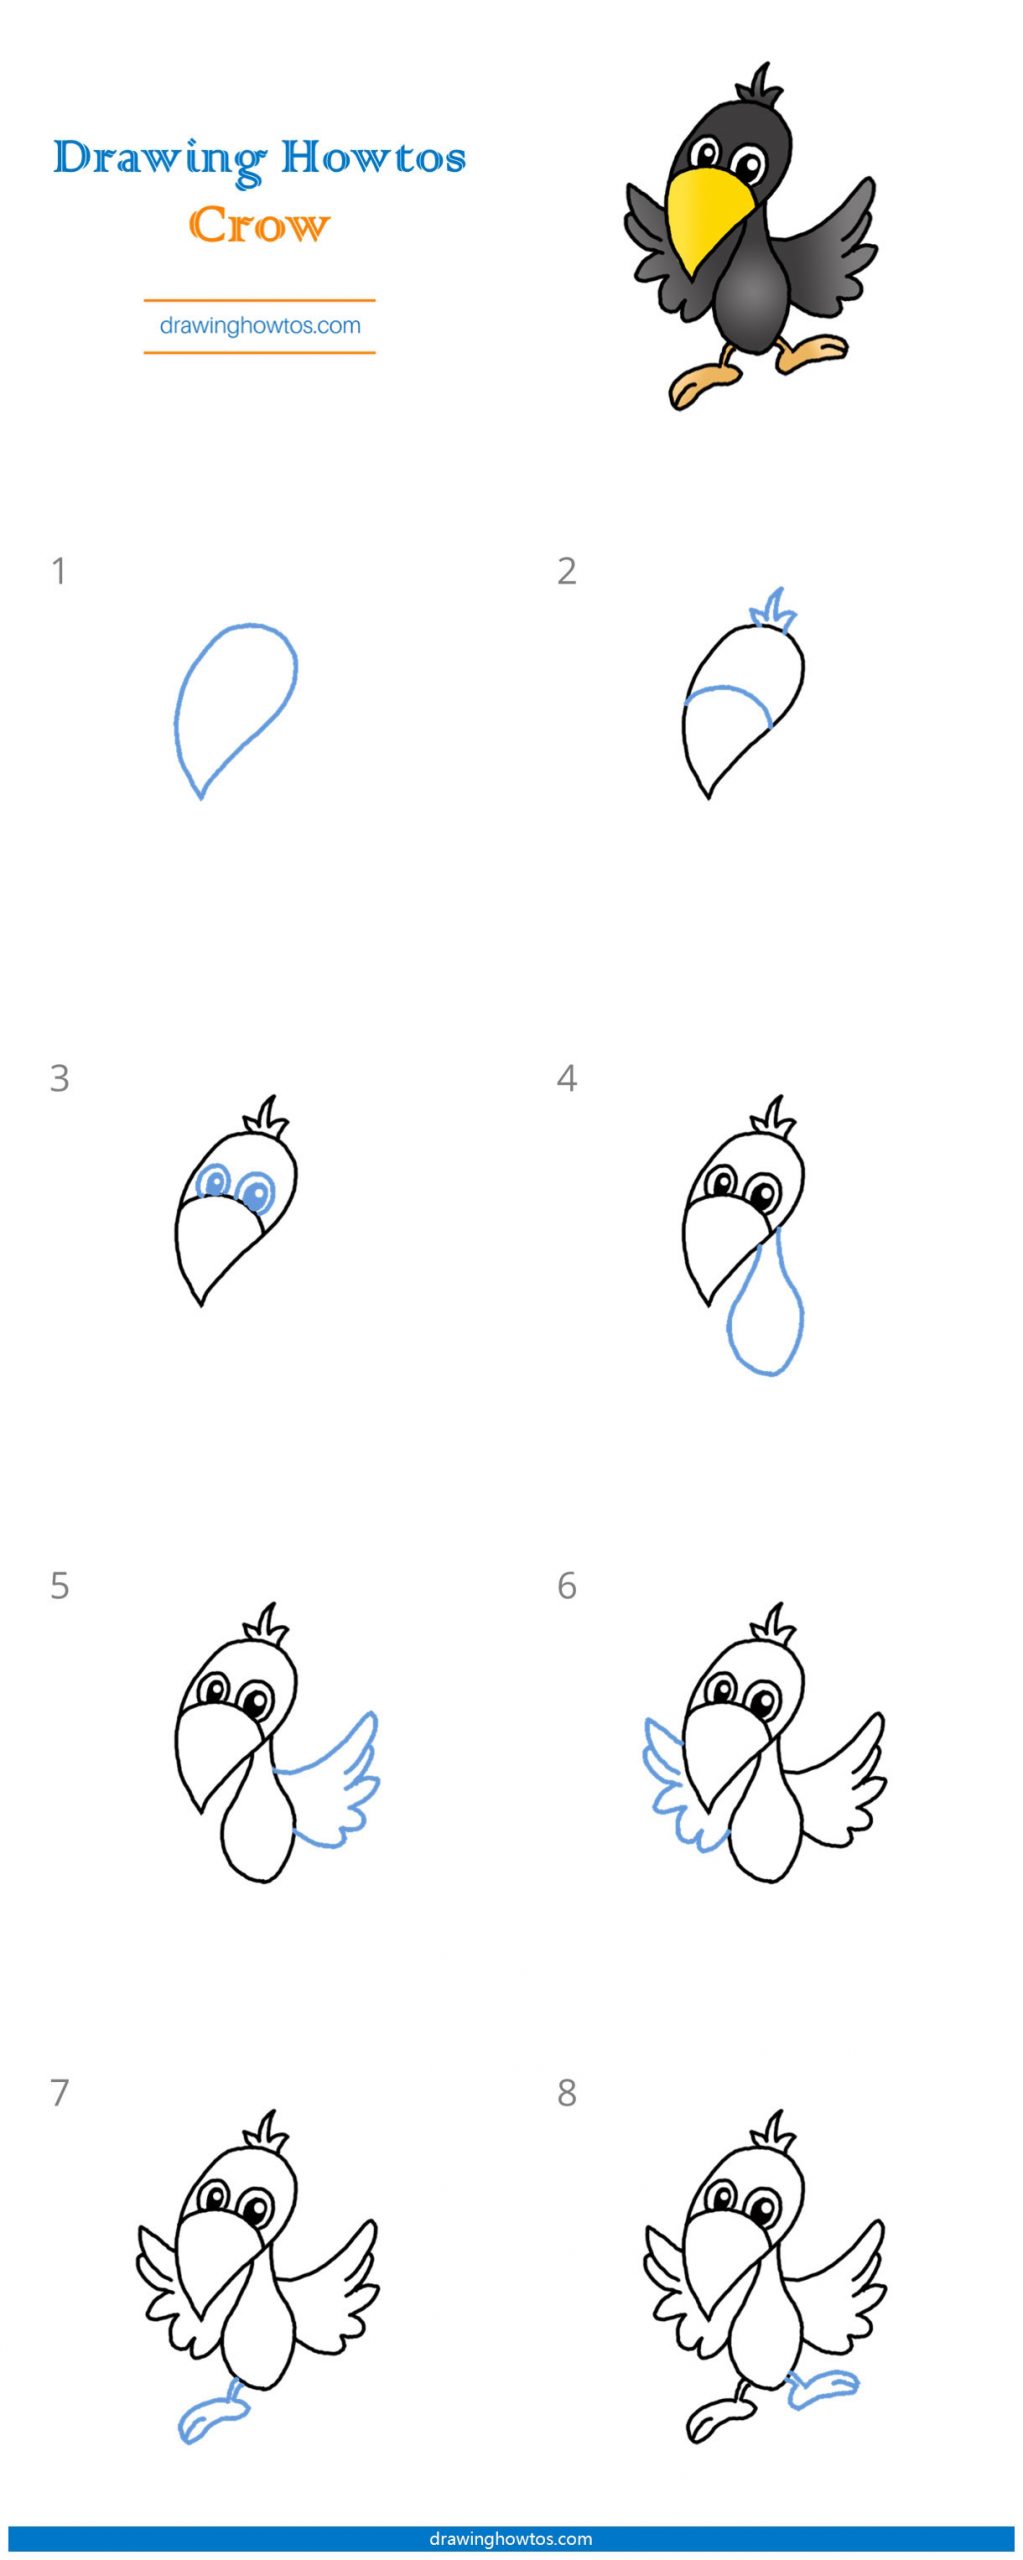 How to Draw a Funny Crow Step by Step